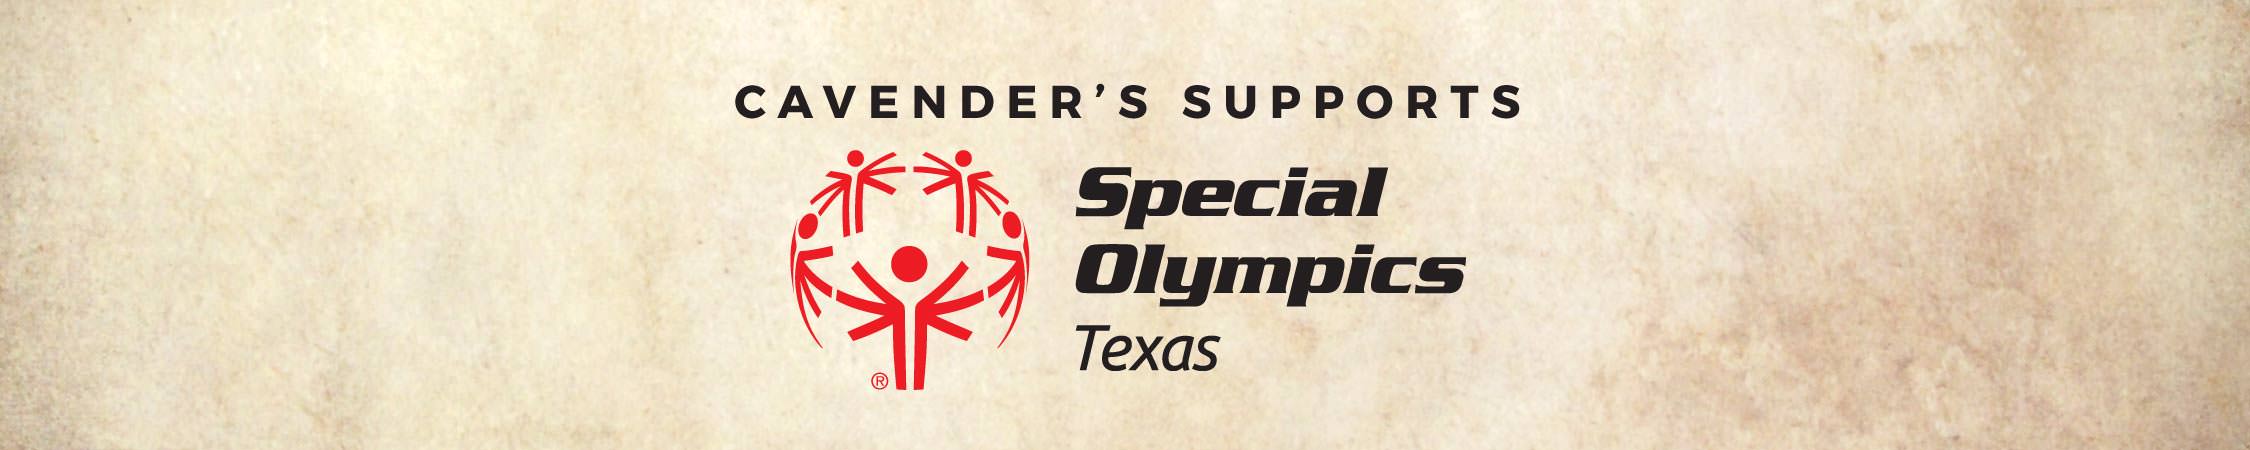 cavenders supports special olympics texas header